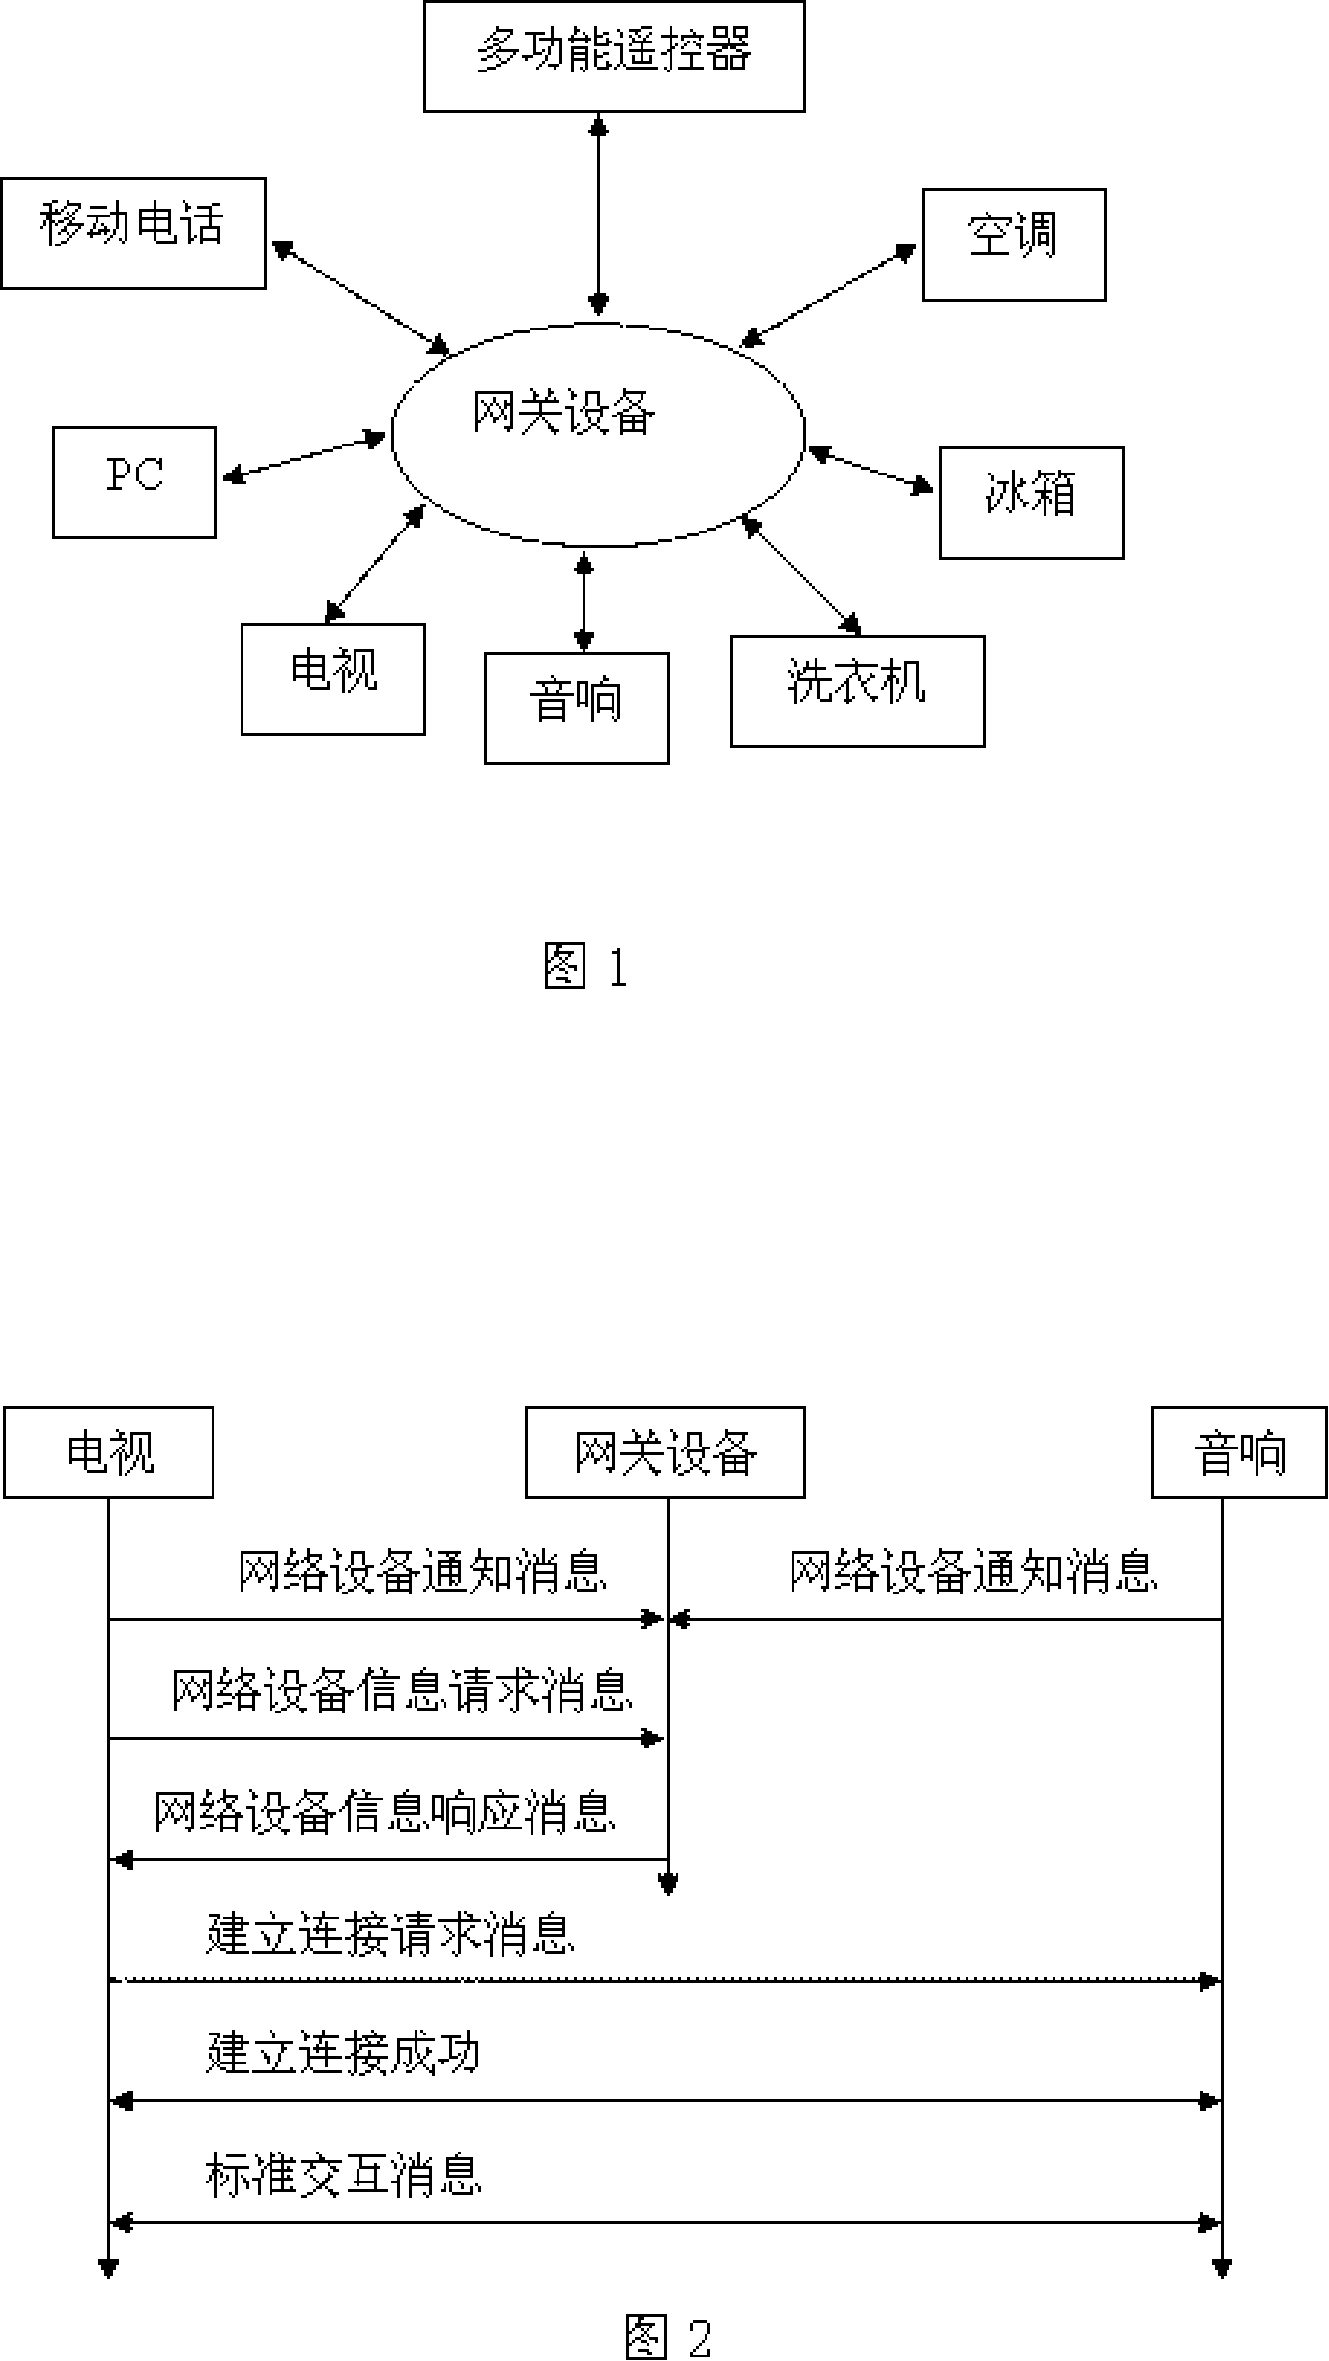 Equipment management and control method of family network